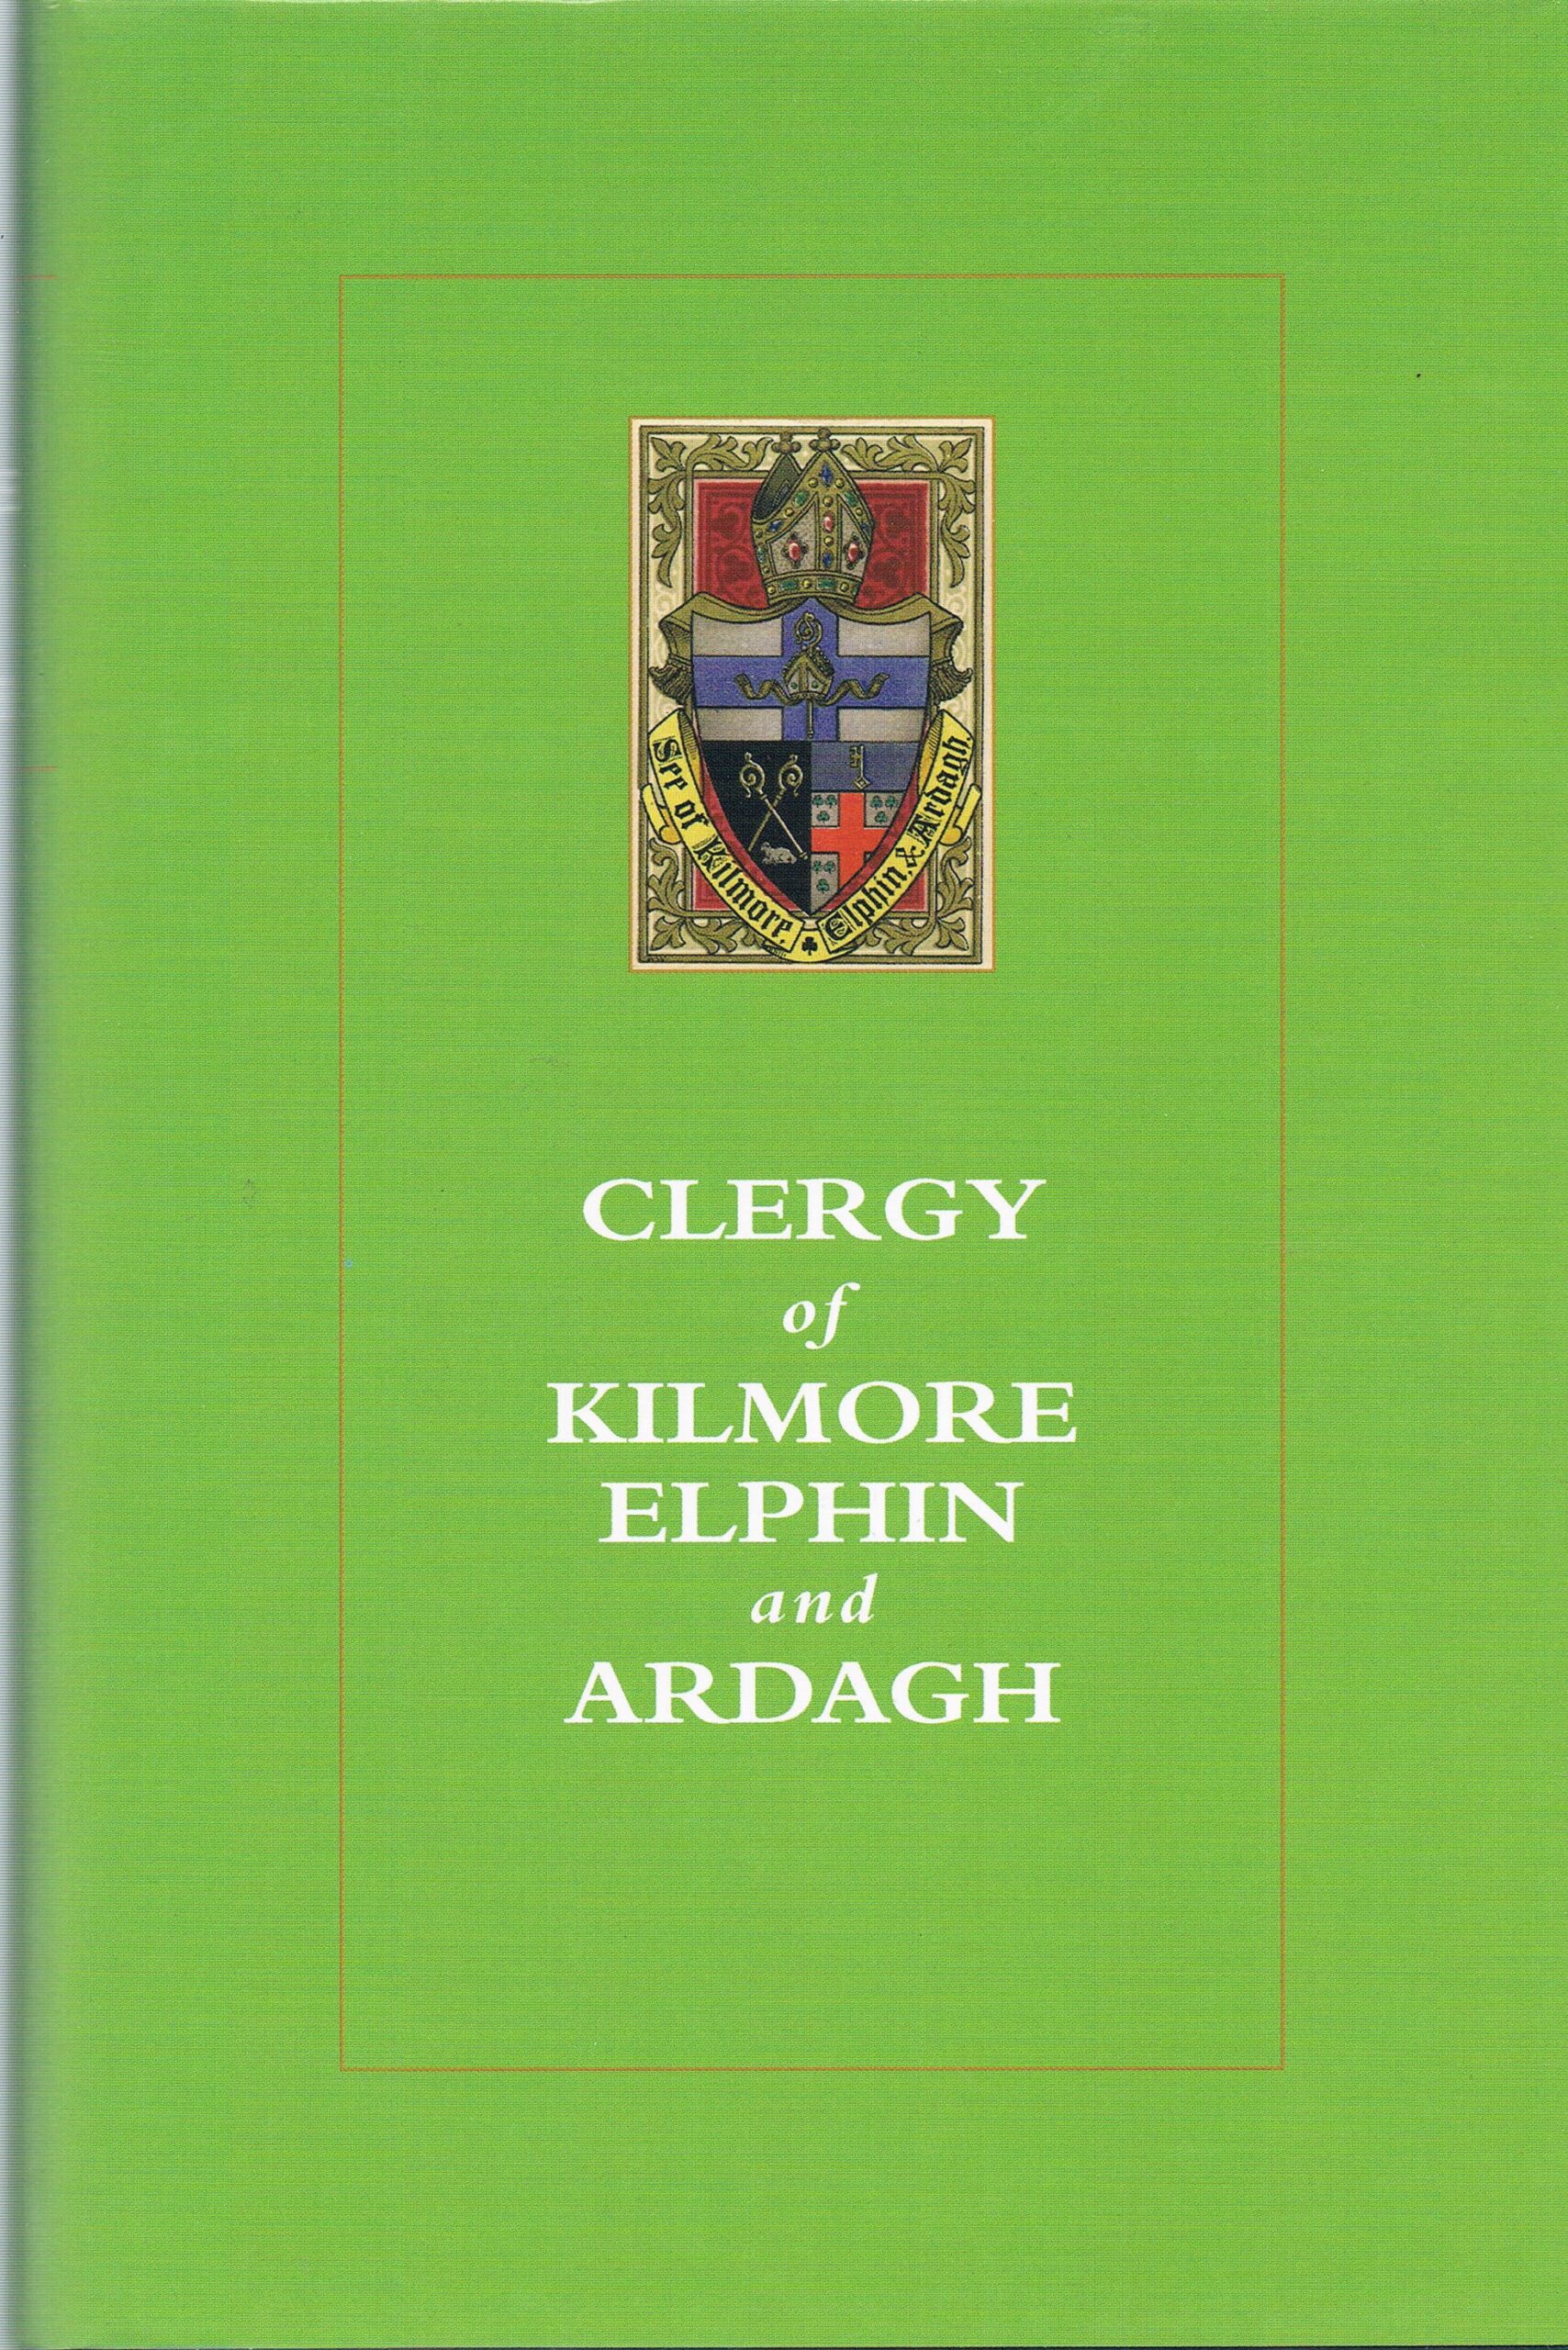 Clergy of Kilmore, Elphin and Ardagh | D.W.T. Crooks | Charlie Byrne's